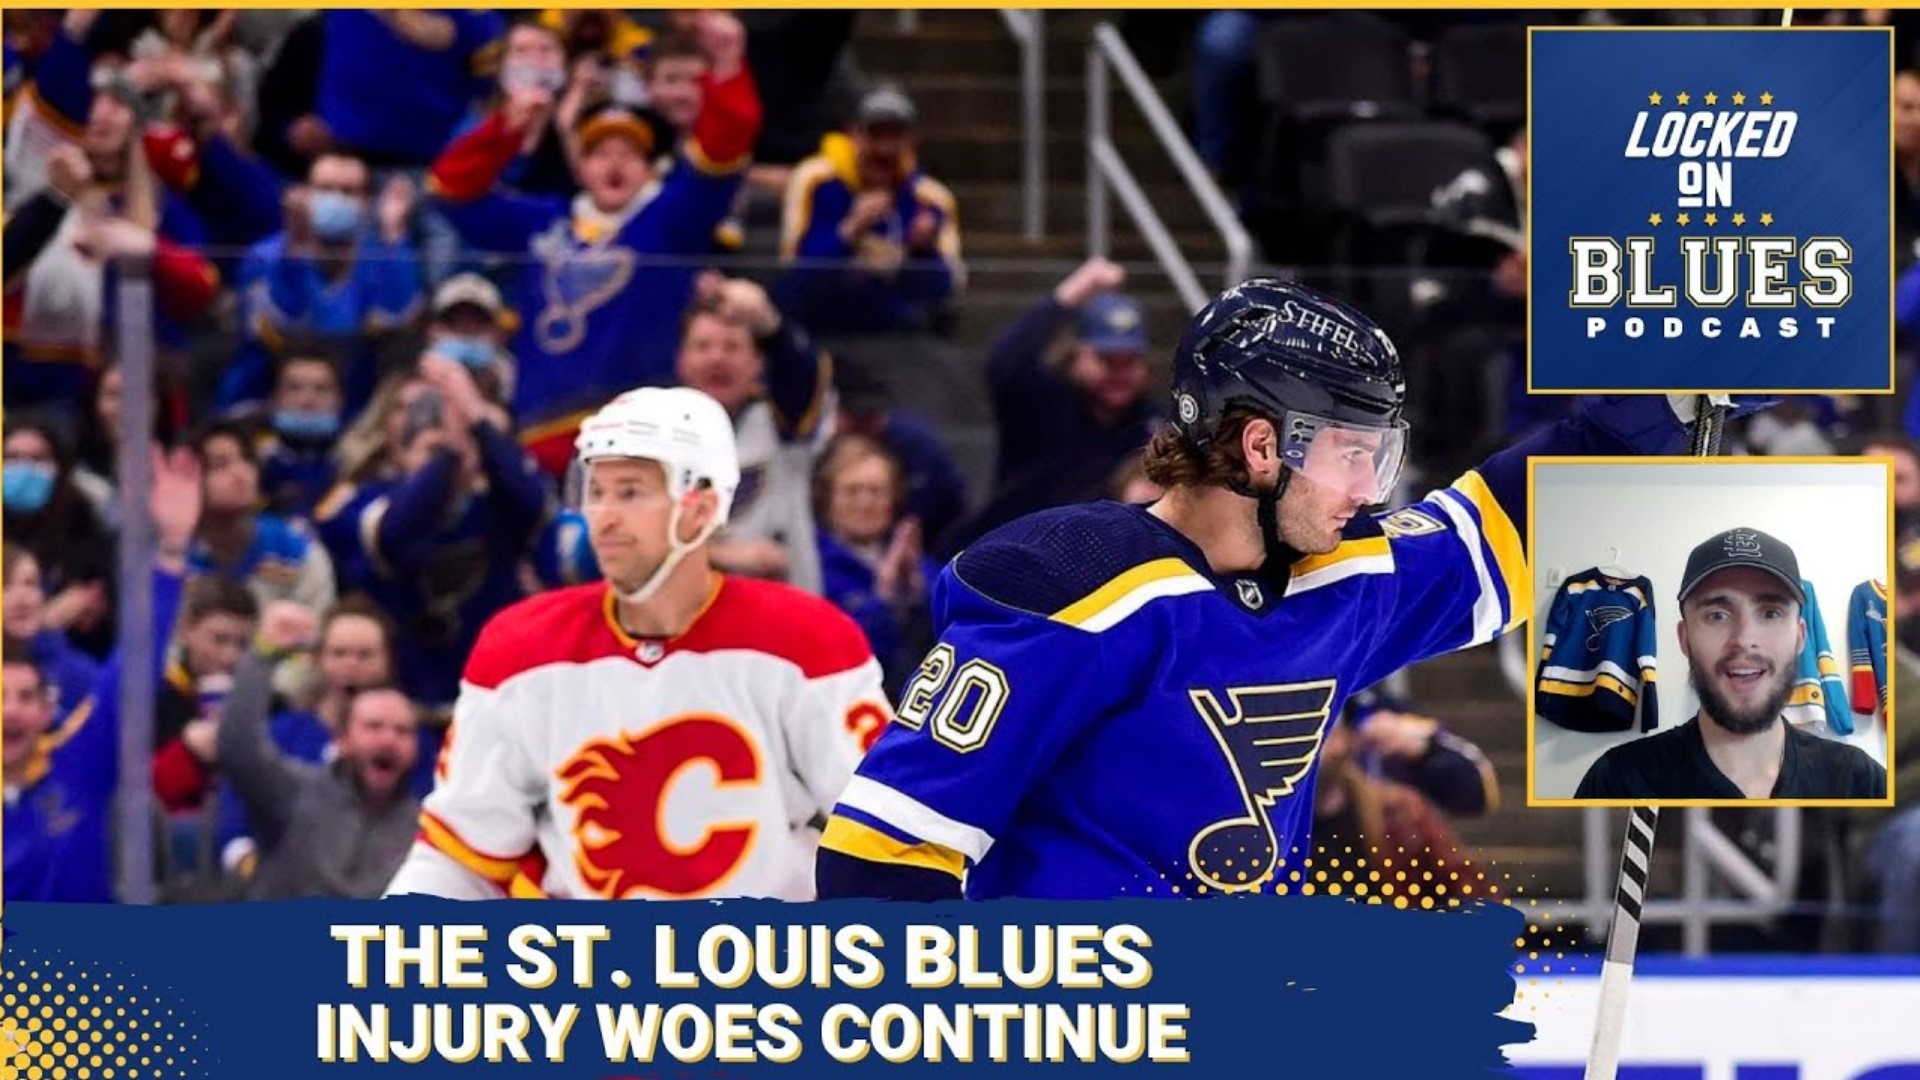 Josh Hyman breaks down the ever-growing list of injuries for the St. Louis Blues. He also previews Tuesday's game against the Calgary Flames.